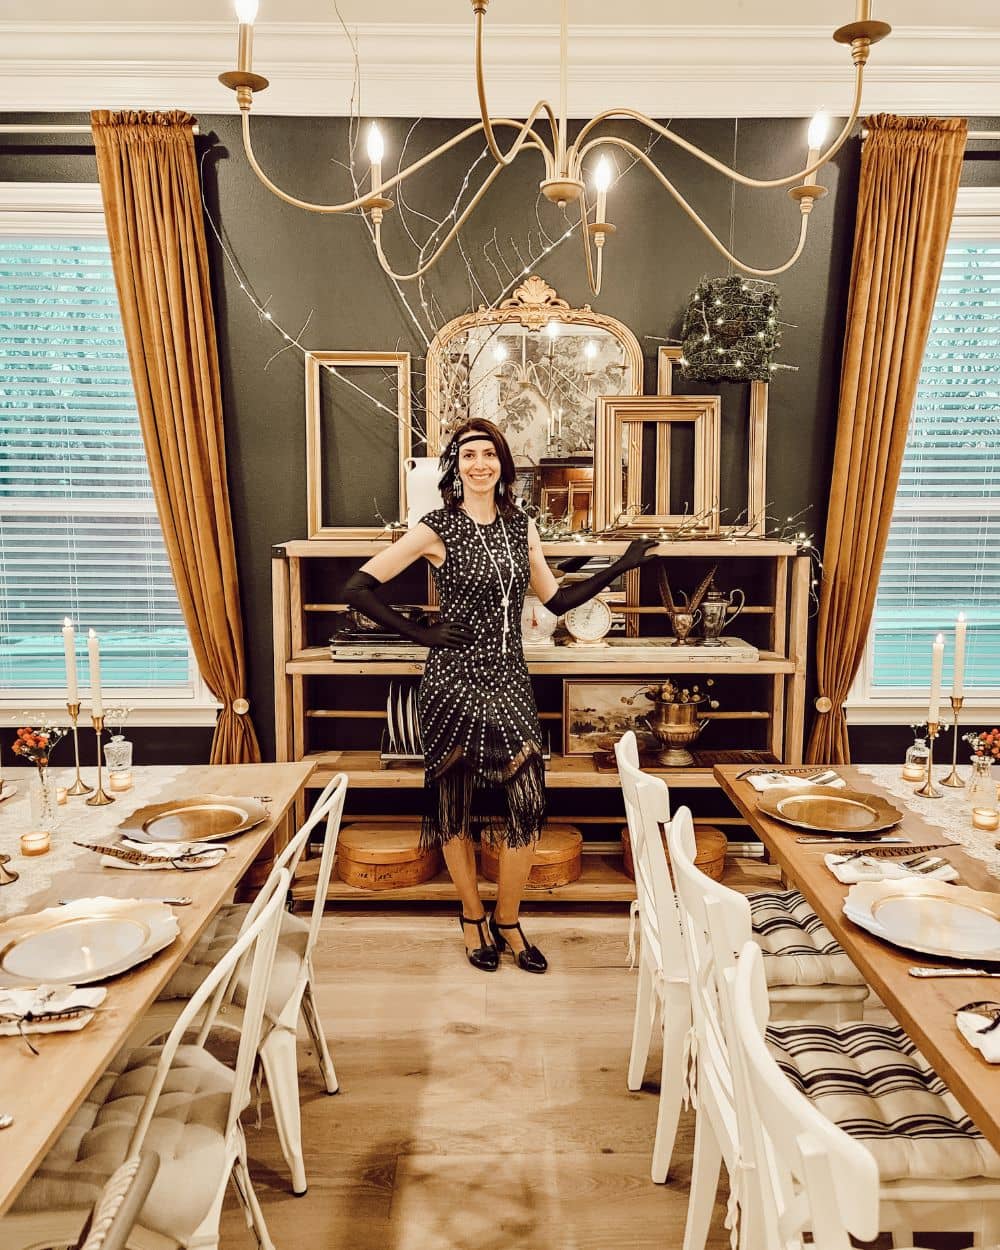 Amy dressed in a flapper dress and the 1920s Downton Abbey inspired dinner party